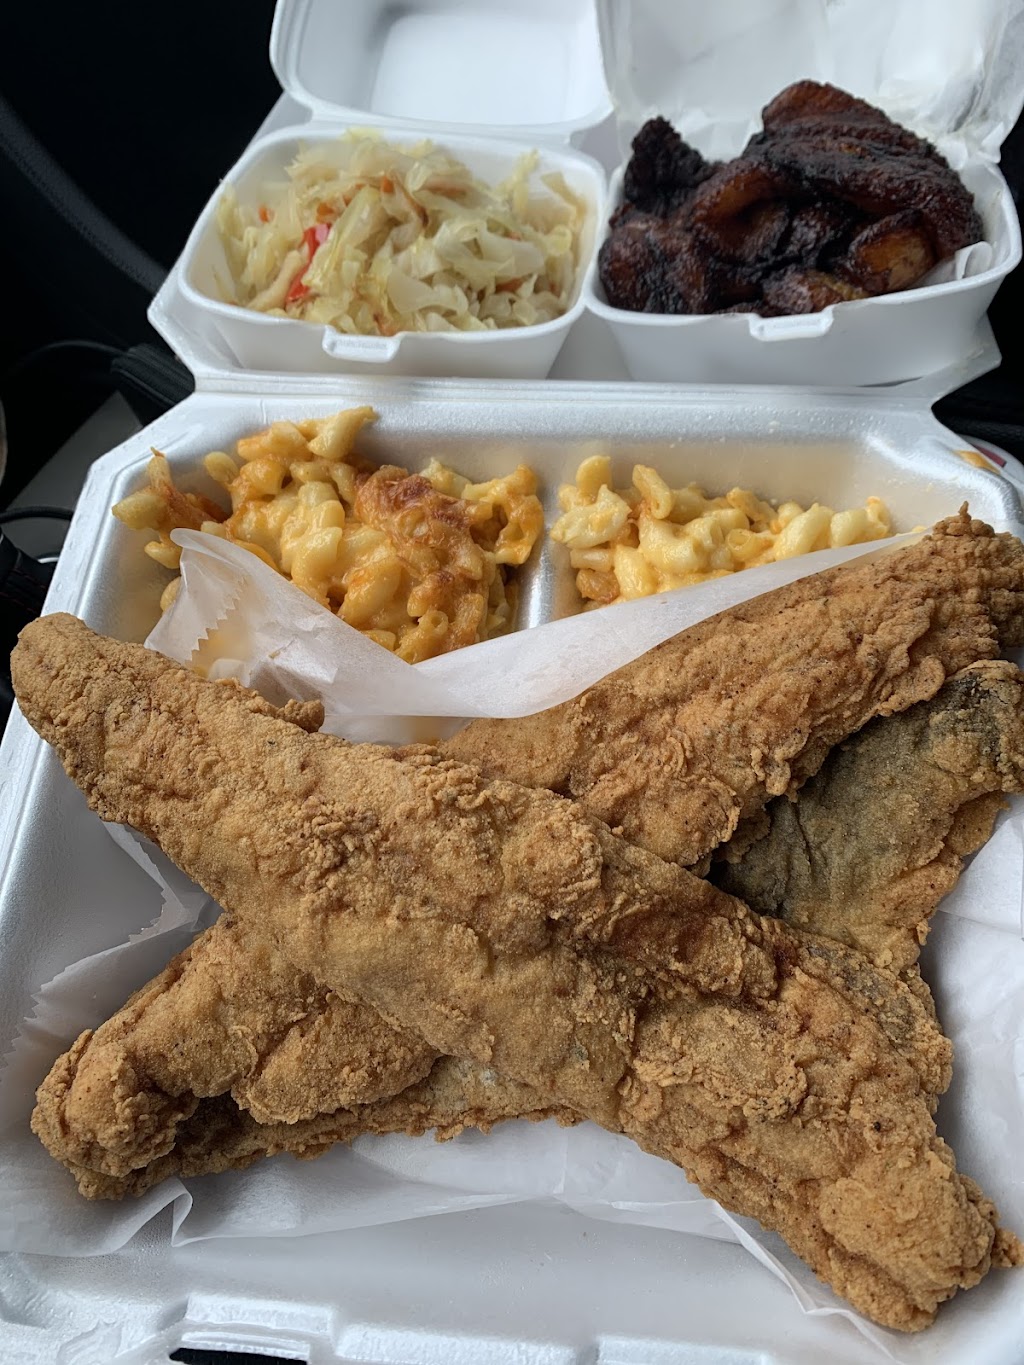 Momma Gs Soul Food and Jamaican Restaurant | 5409 N Dupont Hwy, Dover, DE 19901 | Phone: (302) 744-9090